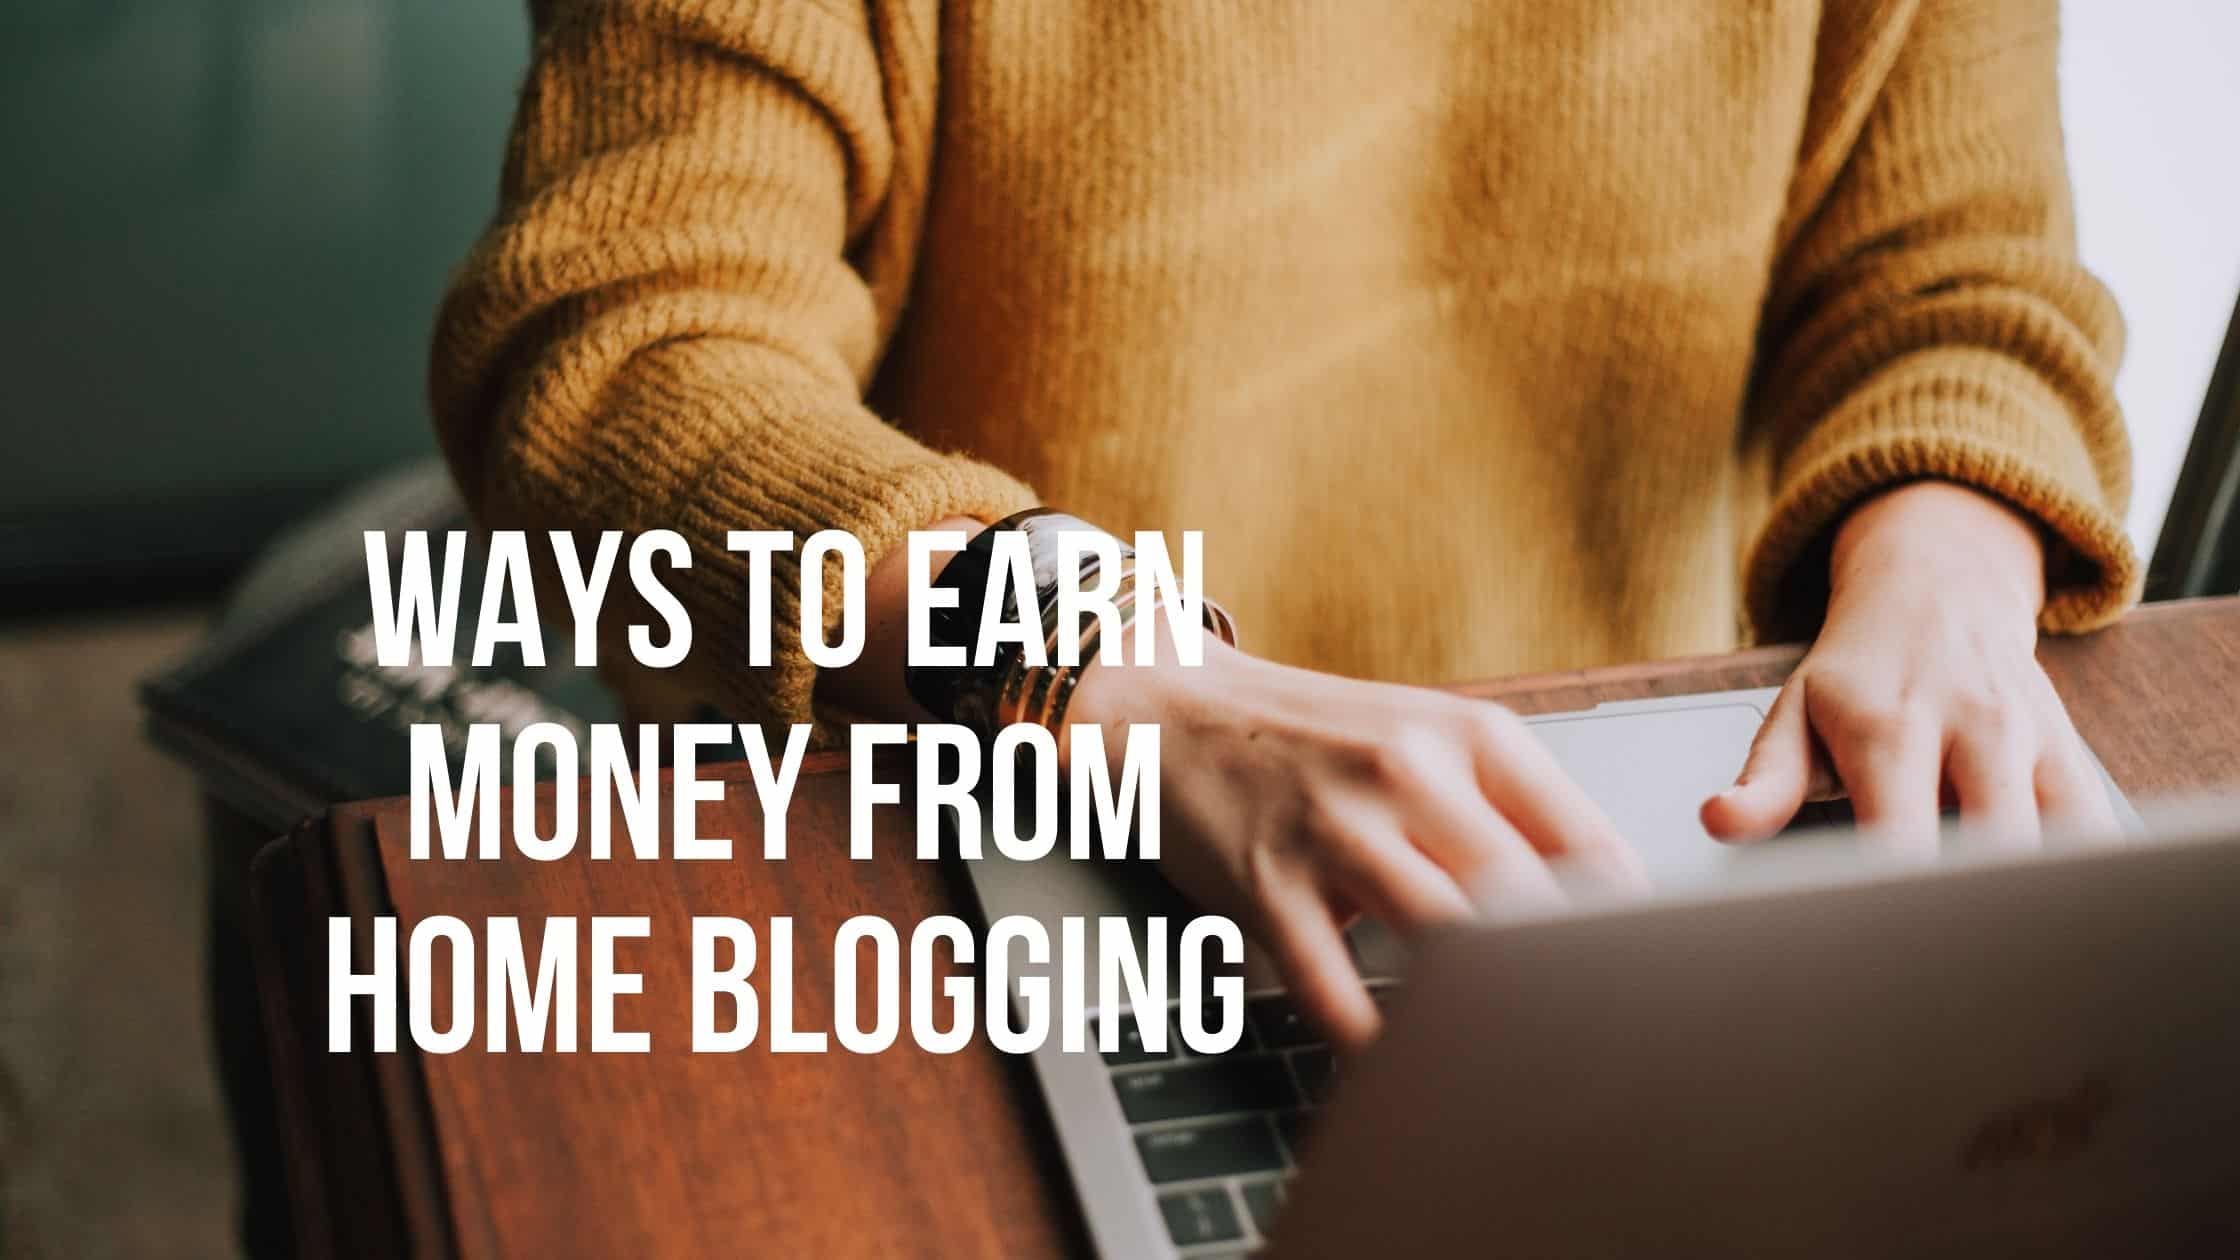 Ways To Earn Money From Home Blogging